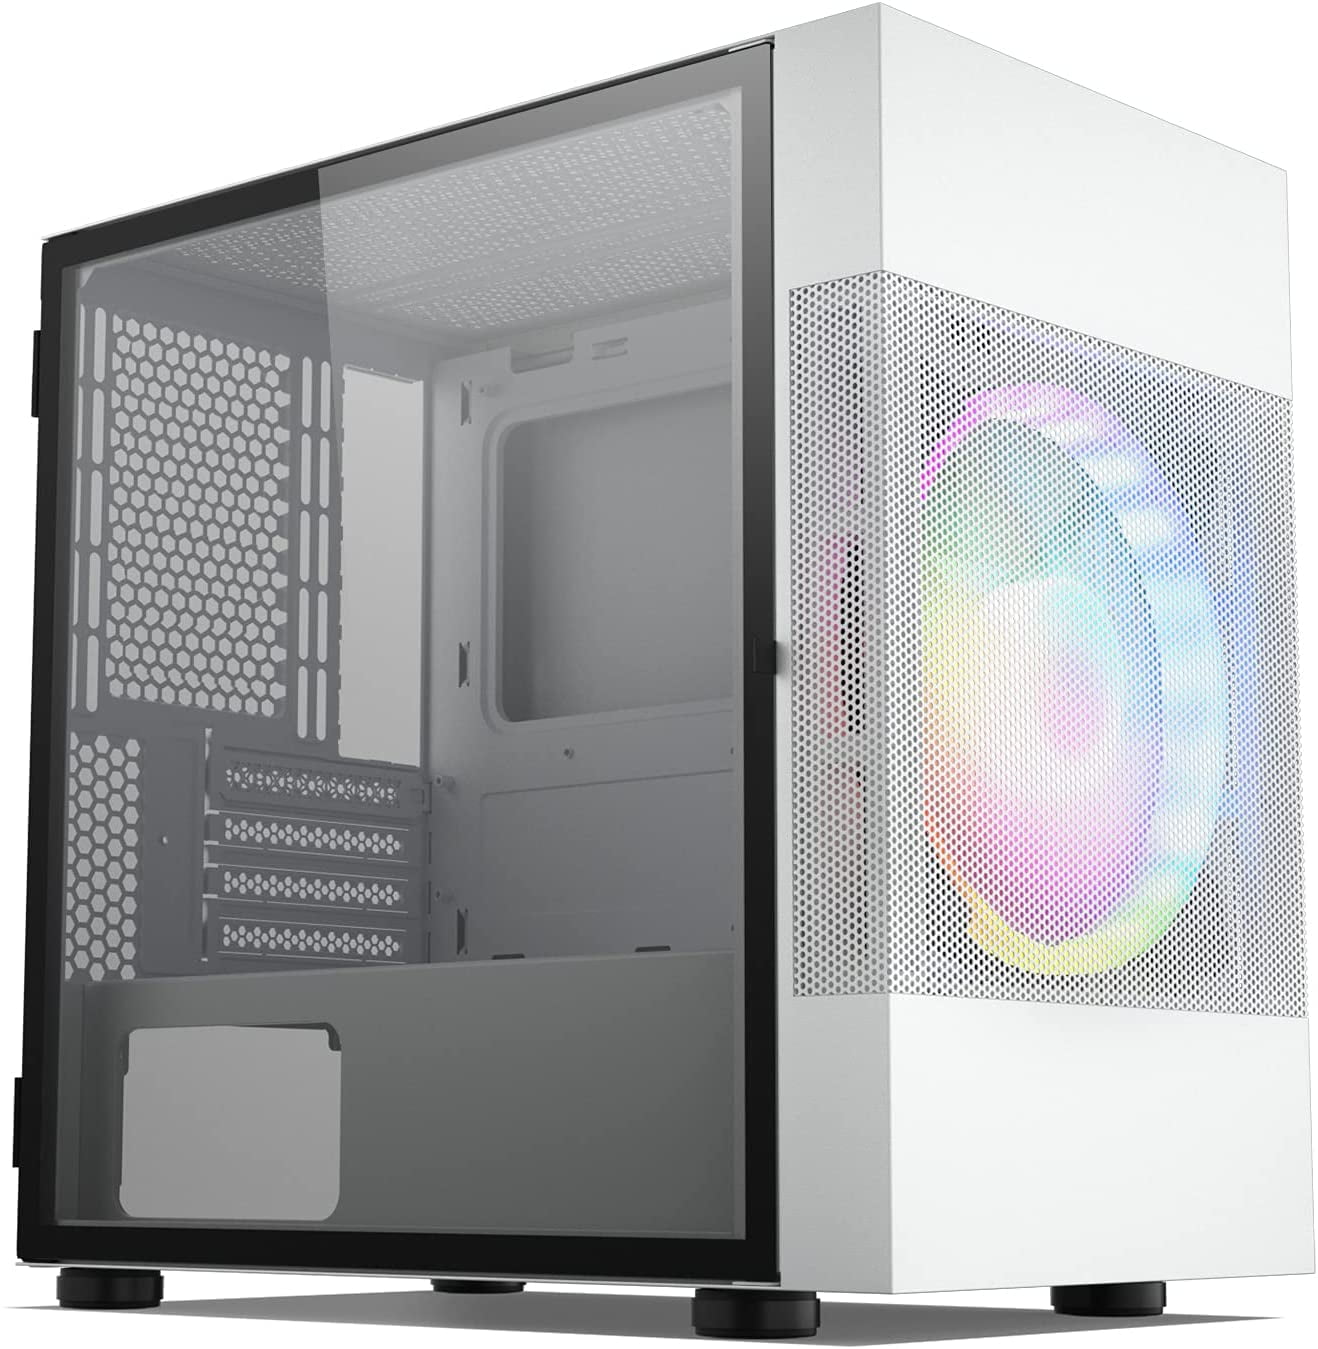 Vild Sygdom Hjemland Vetroo M01 Compact M-ATX Mesh Gaming Pc Case, Pre-Installed 200mm Rainbow  Fan, Door Opening Tempered Glass Panel Design, Air-Water Cooling Ready -  Walmart.com